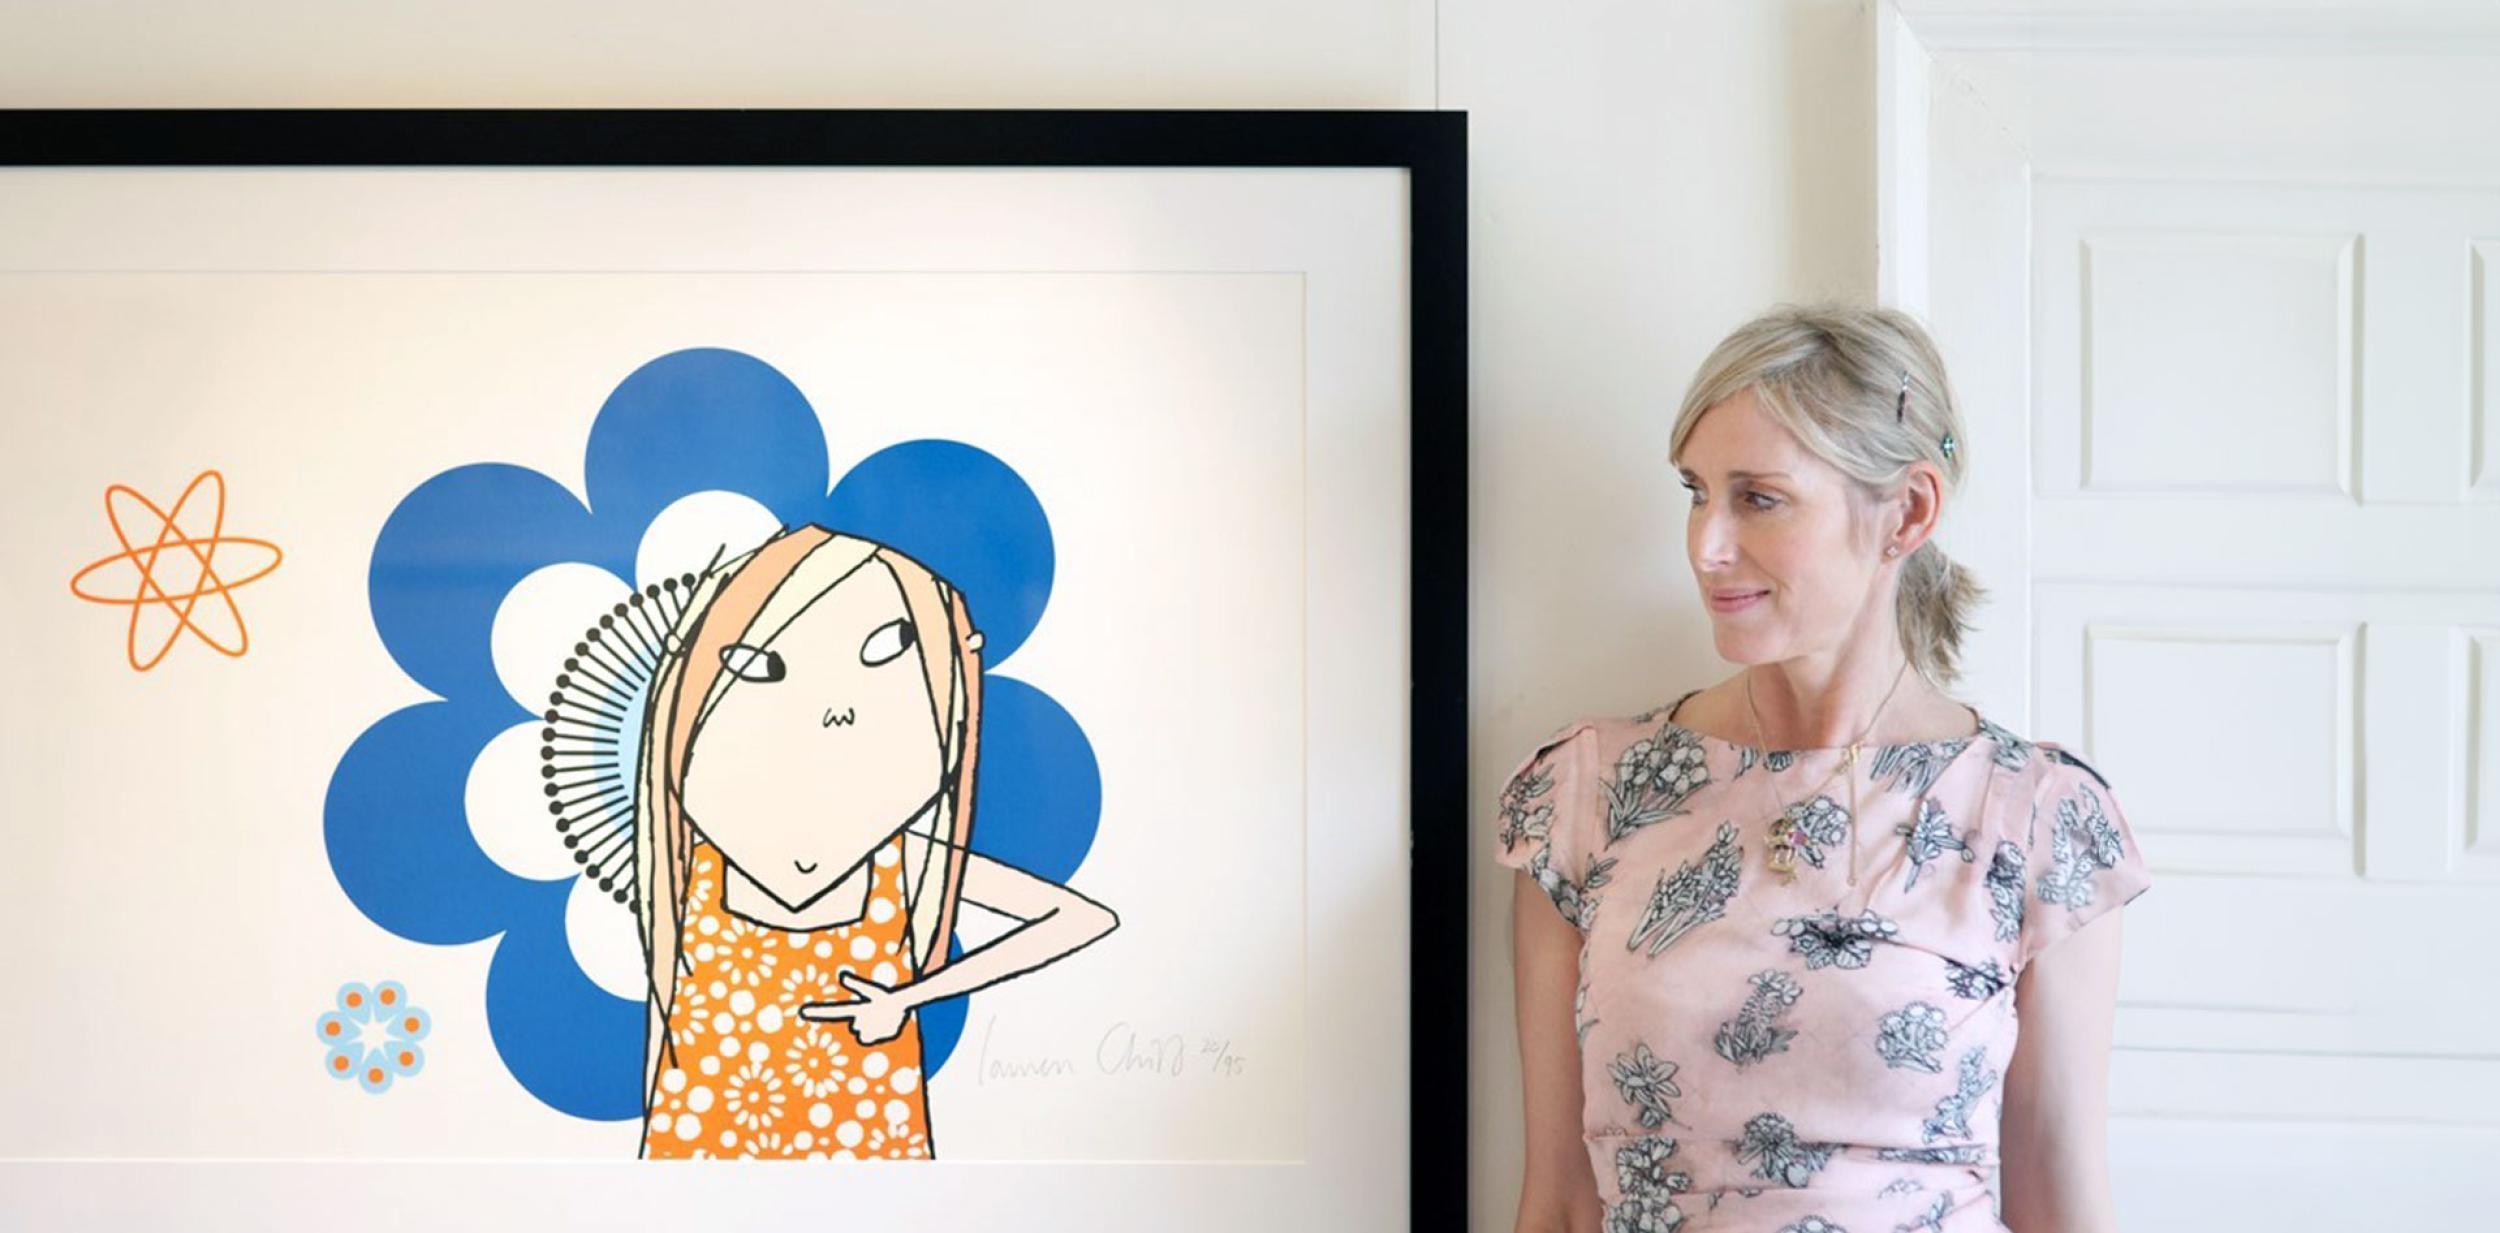 Lauren Child and an illustration of Clarice Bean